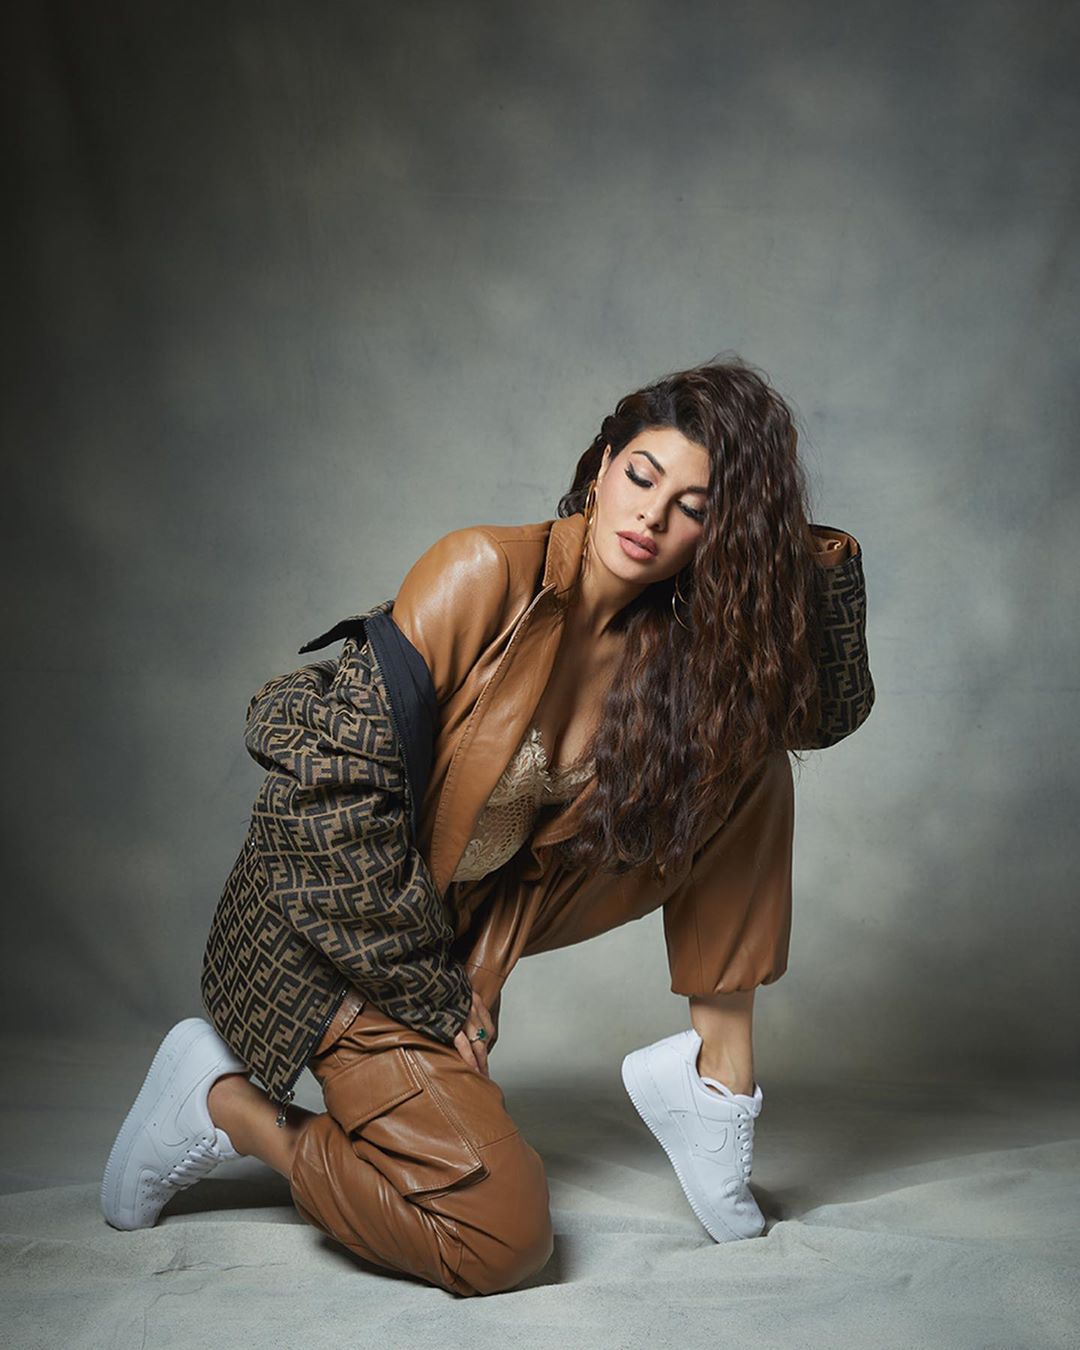 Jacqueline Fernandez Narrowly Escapes Covid-19 As Two Crew Members From Her Shoot Test Positive, She Tests Negative